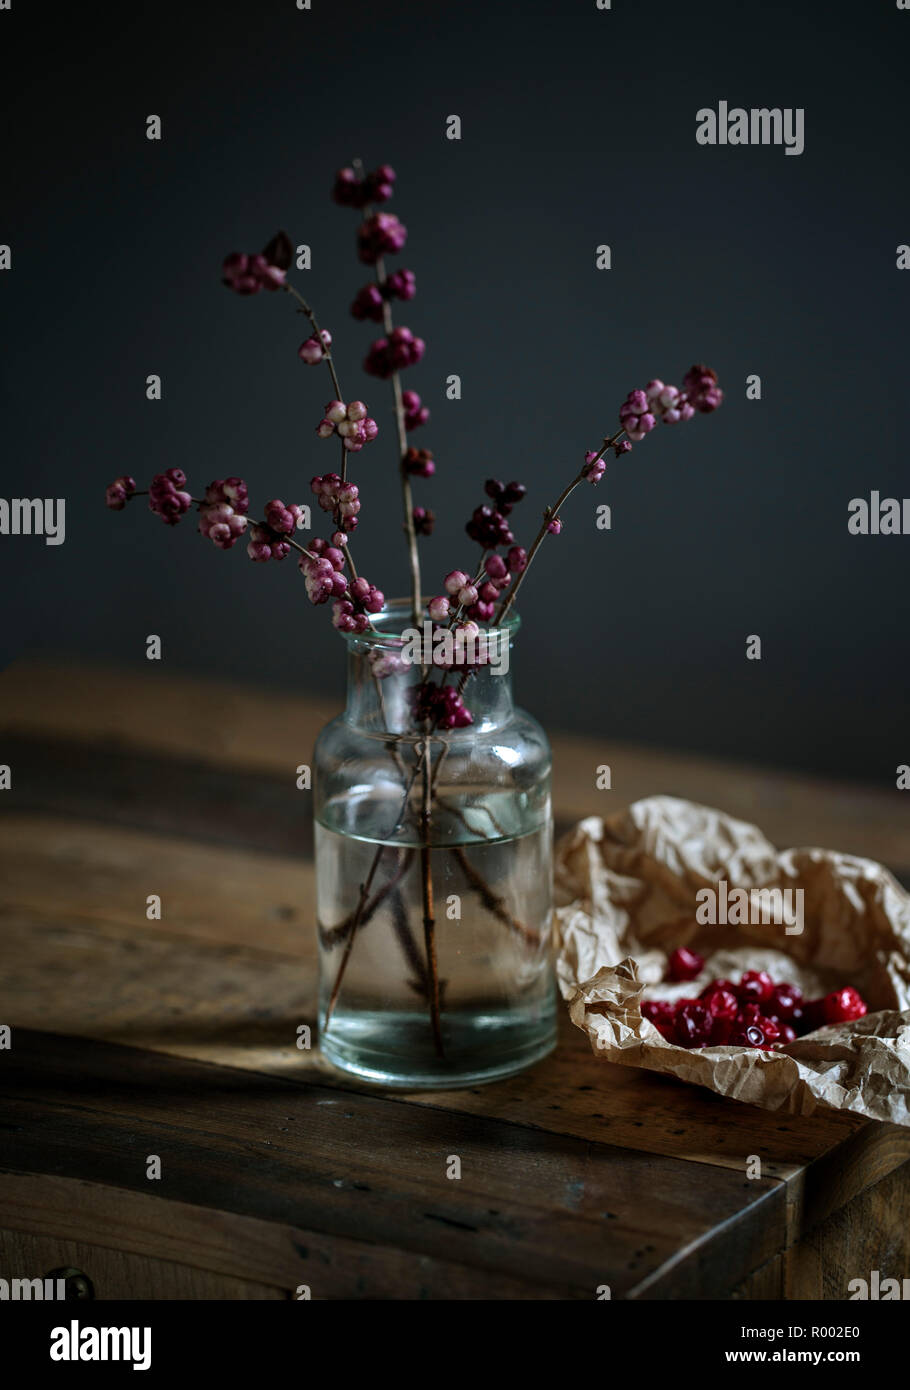 Still Life with Berries Stock Photo